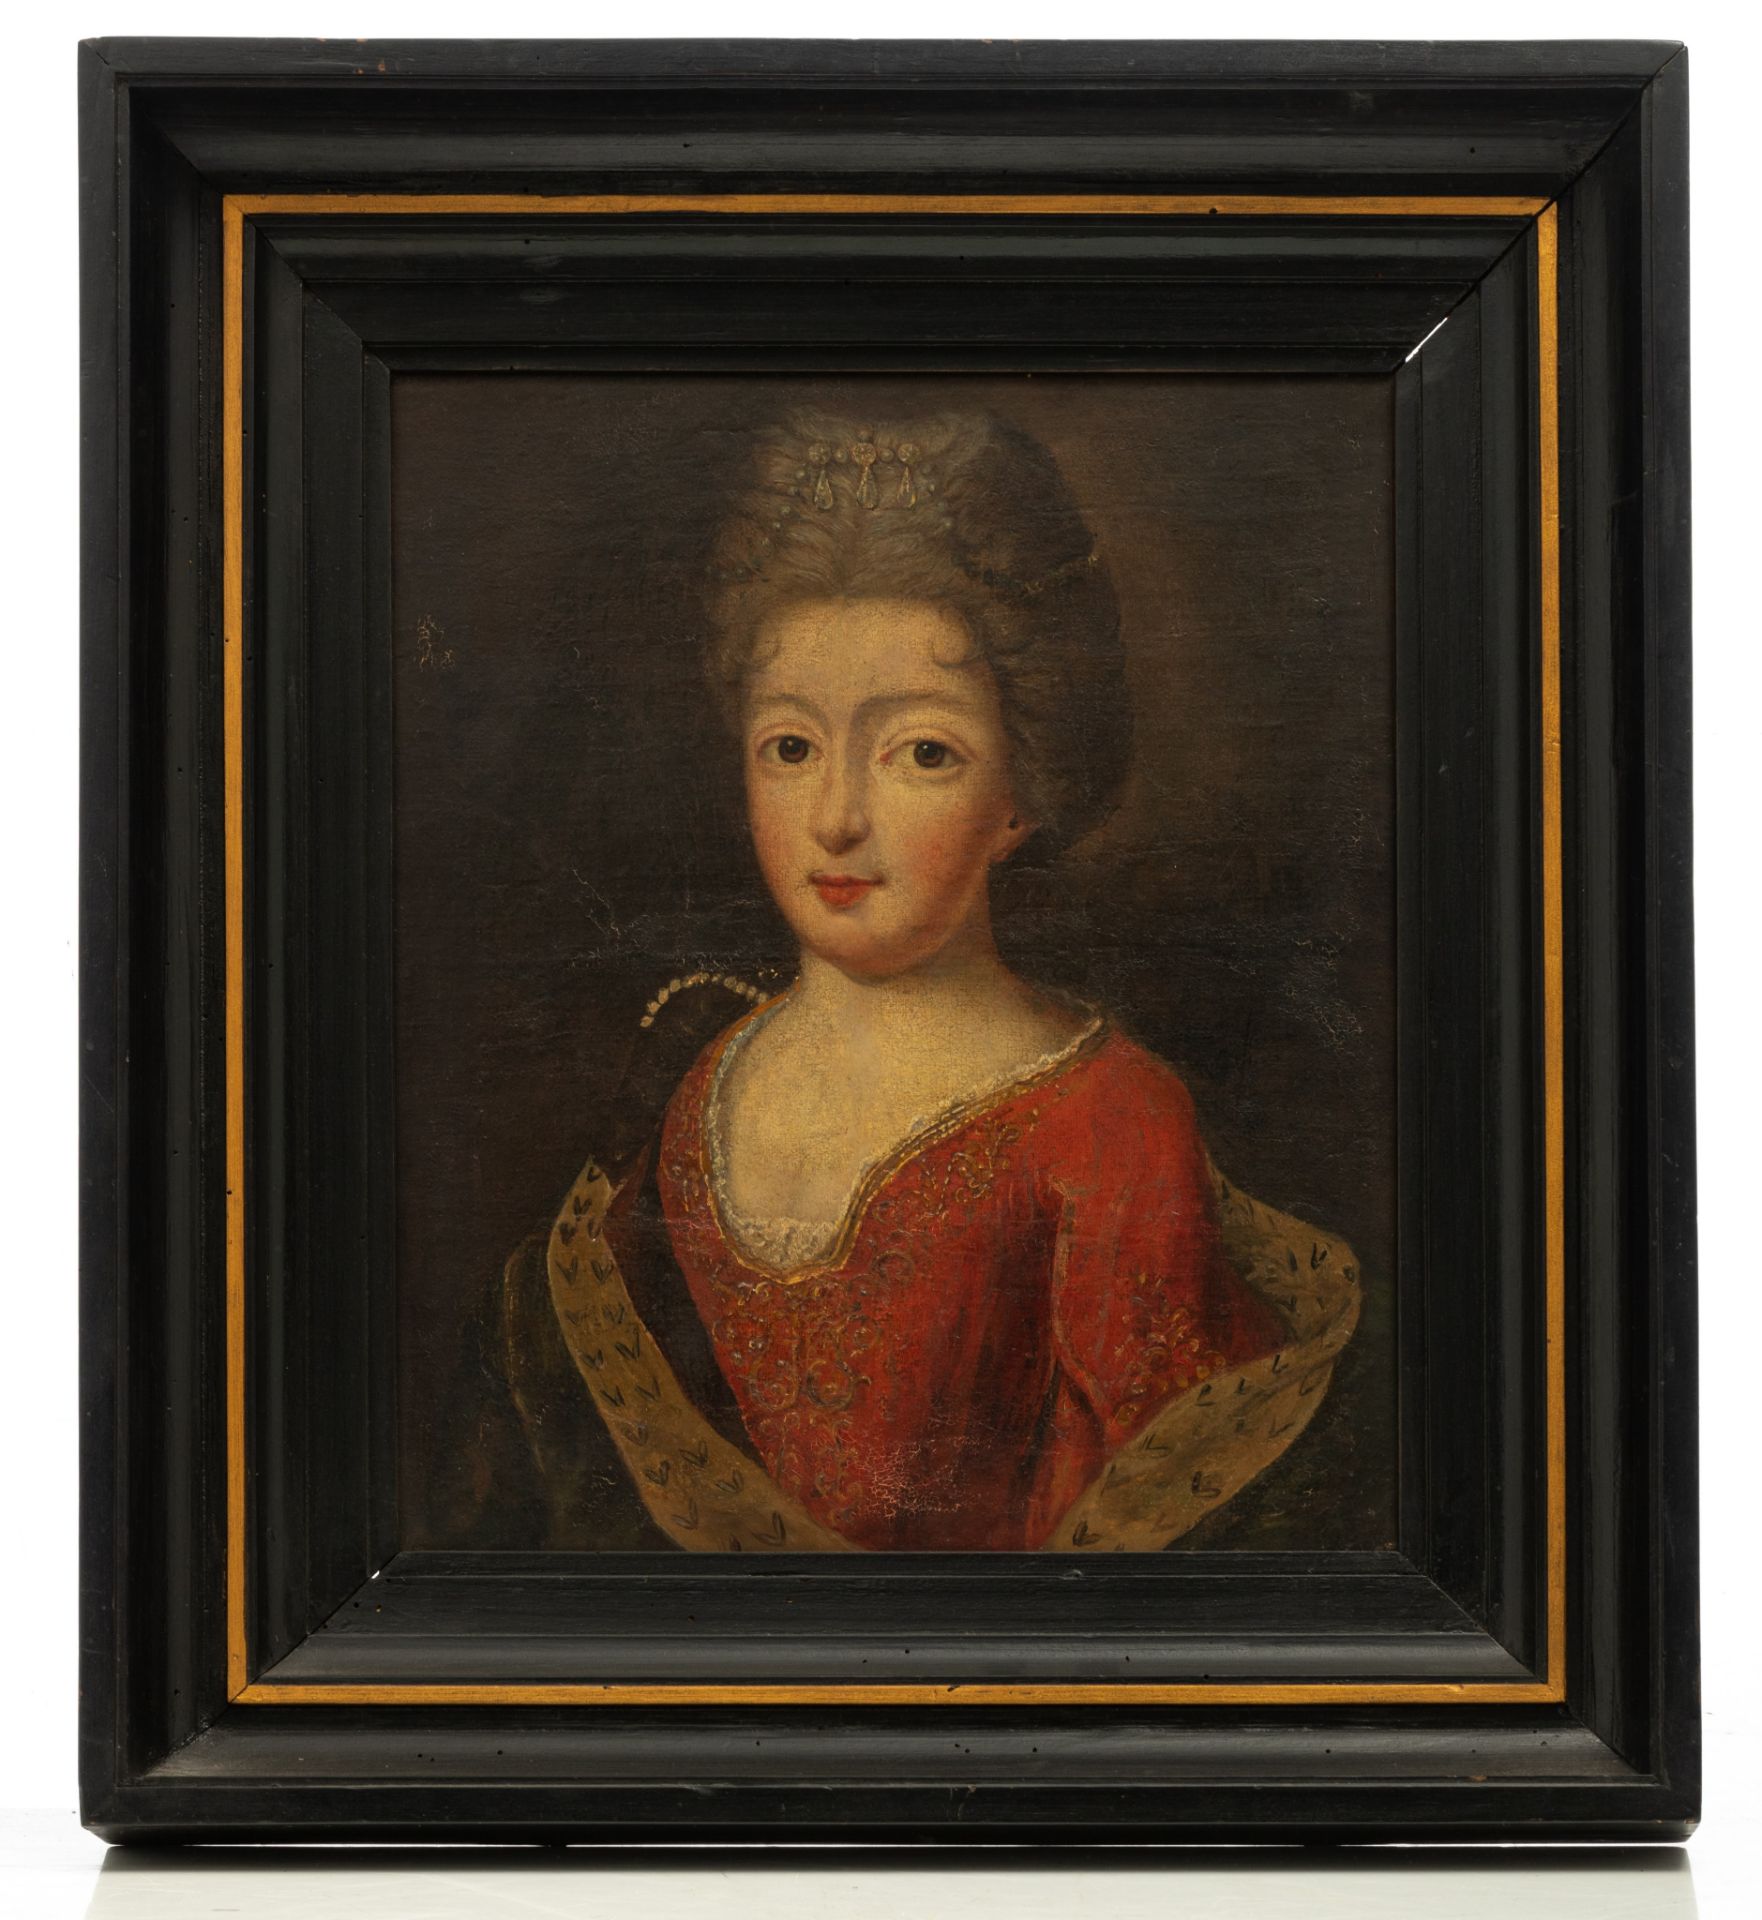 The portrait of a noble lady, 18thC, 32 x 39 cm - Image 8 of 13